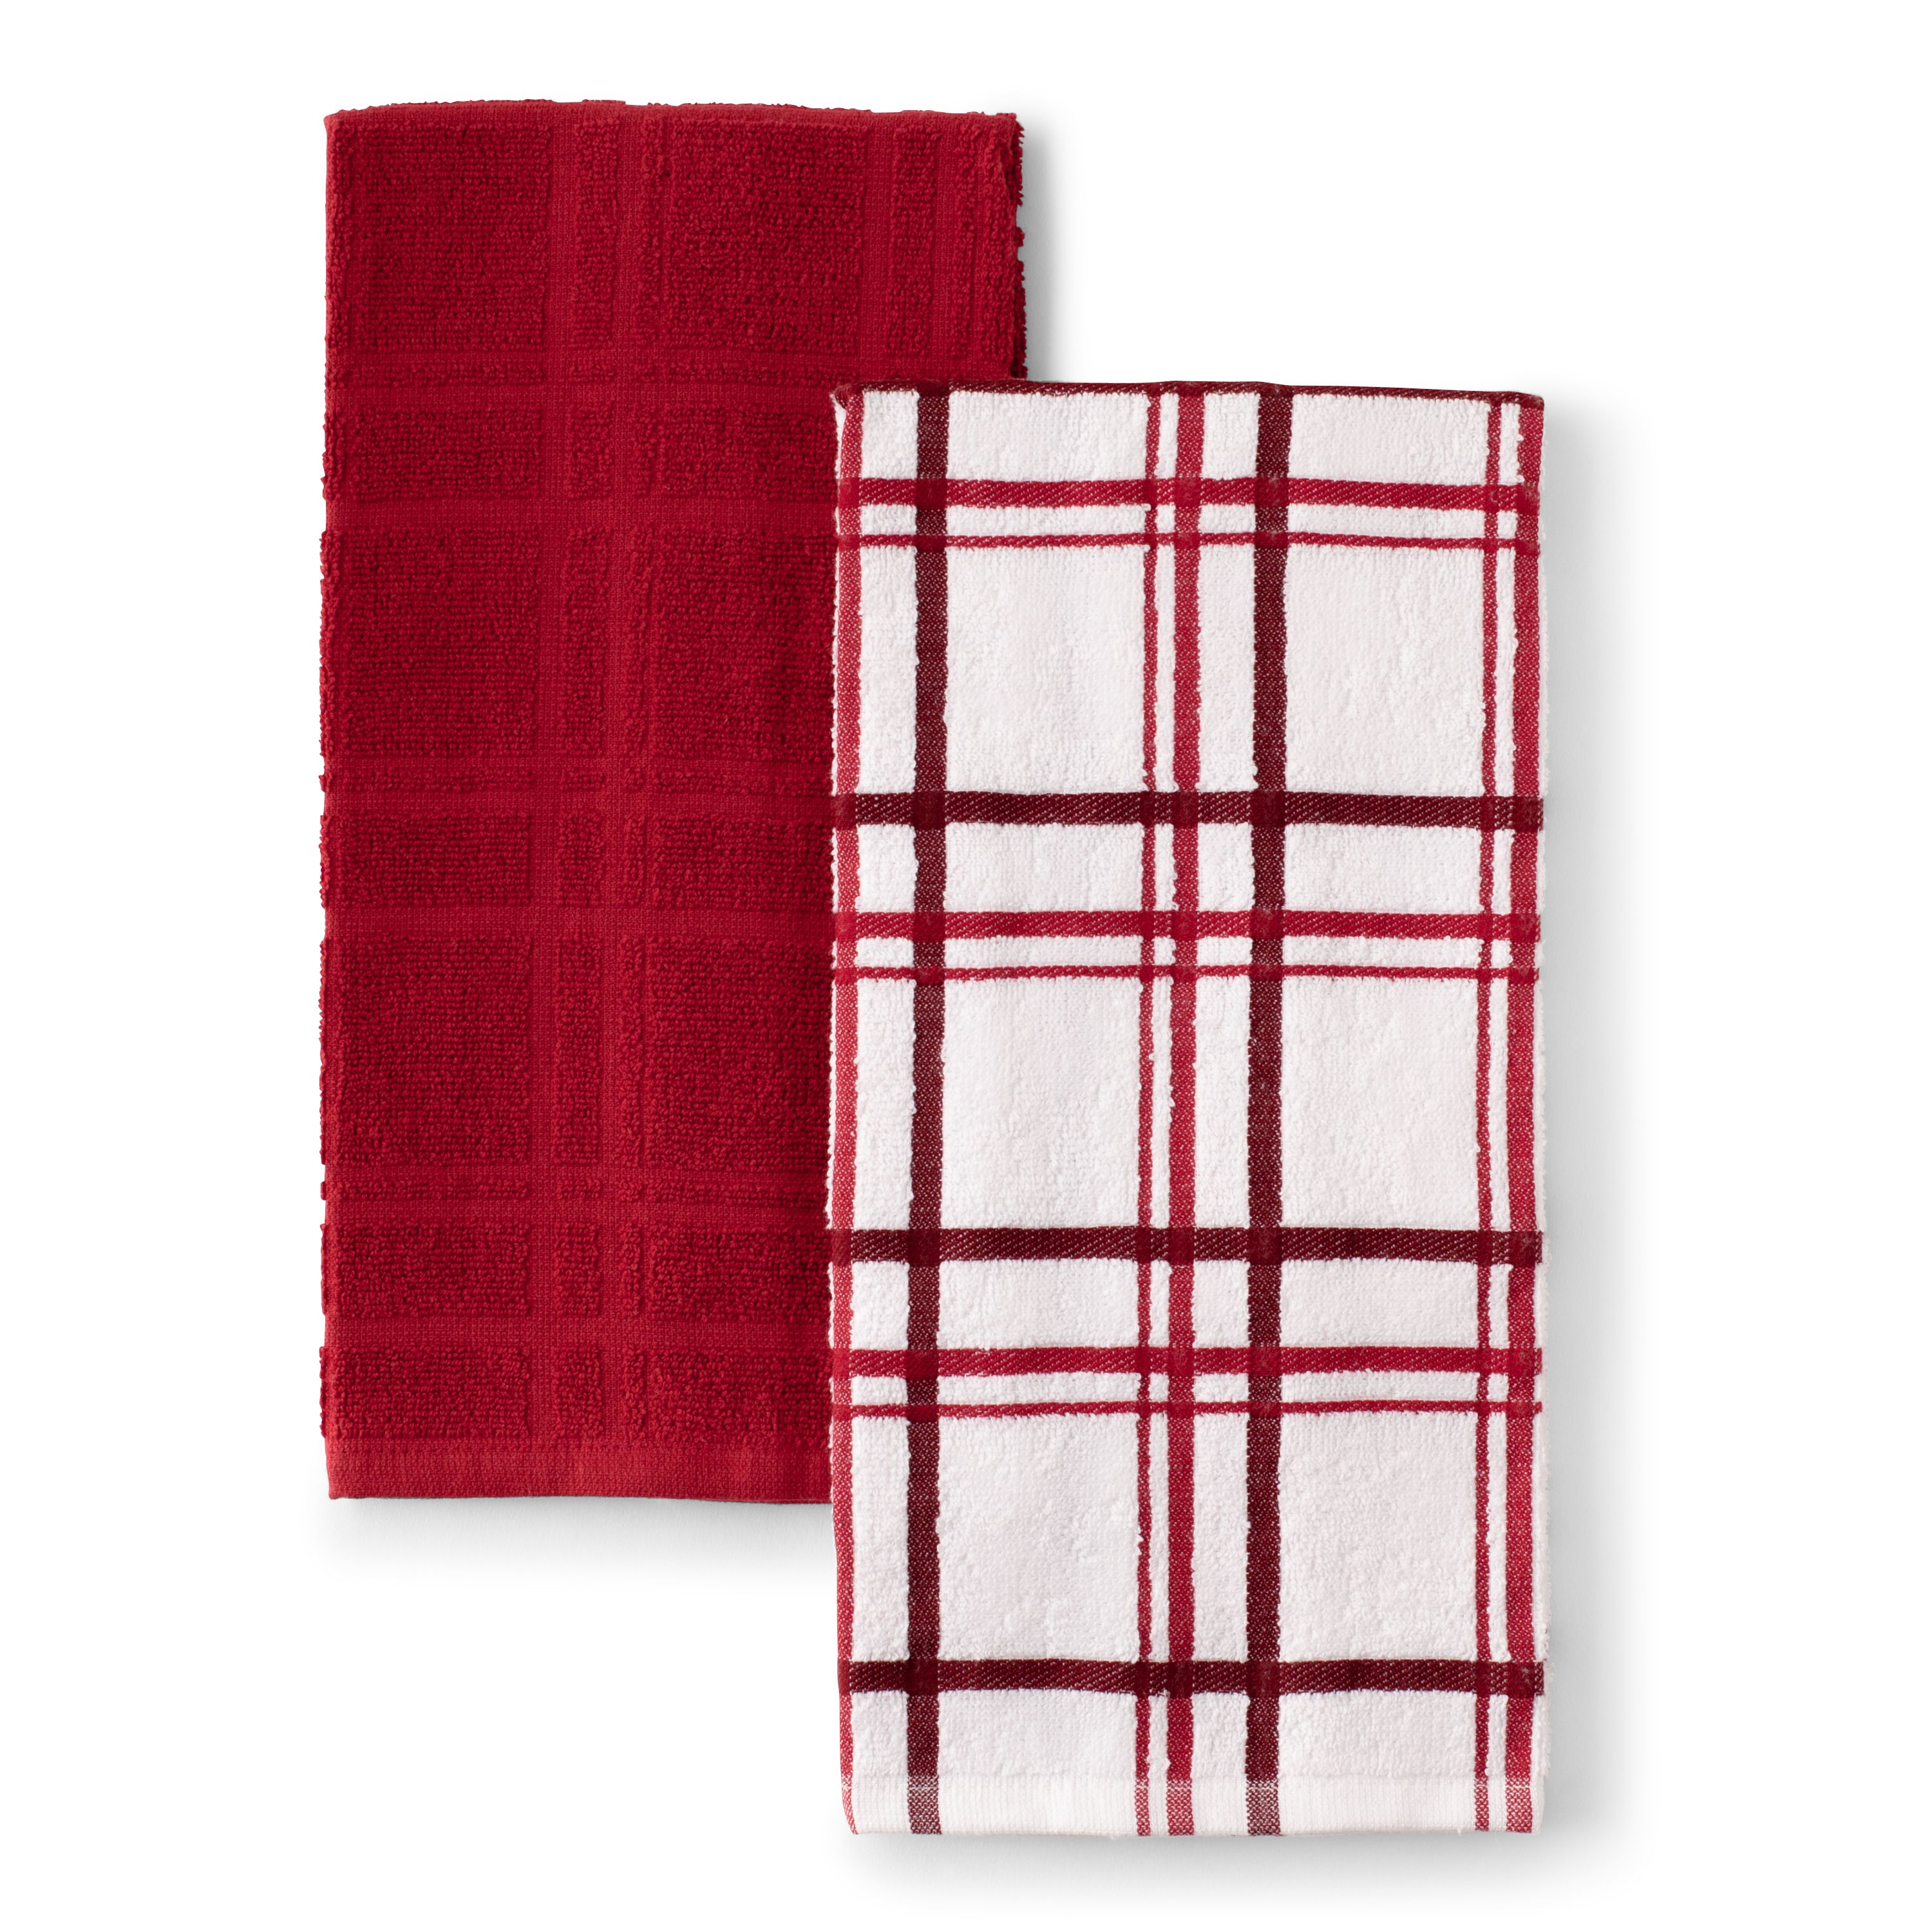 Better Homes & Gardens Kitchen Towel Set, Red, 4 Count - image 4 of 6